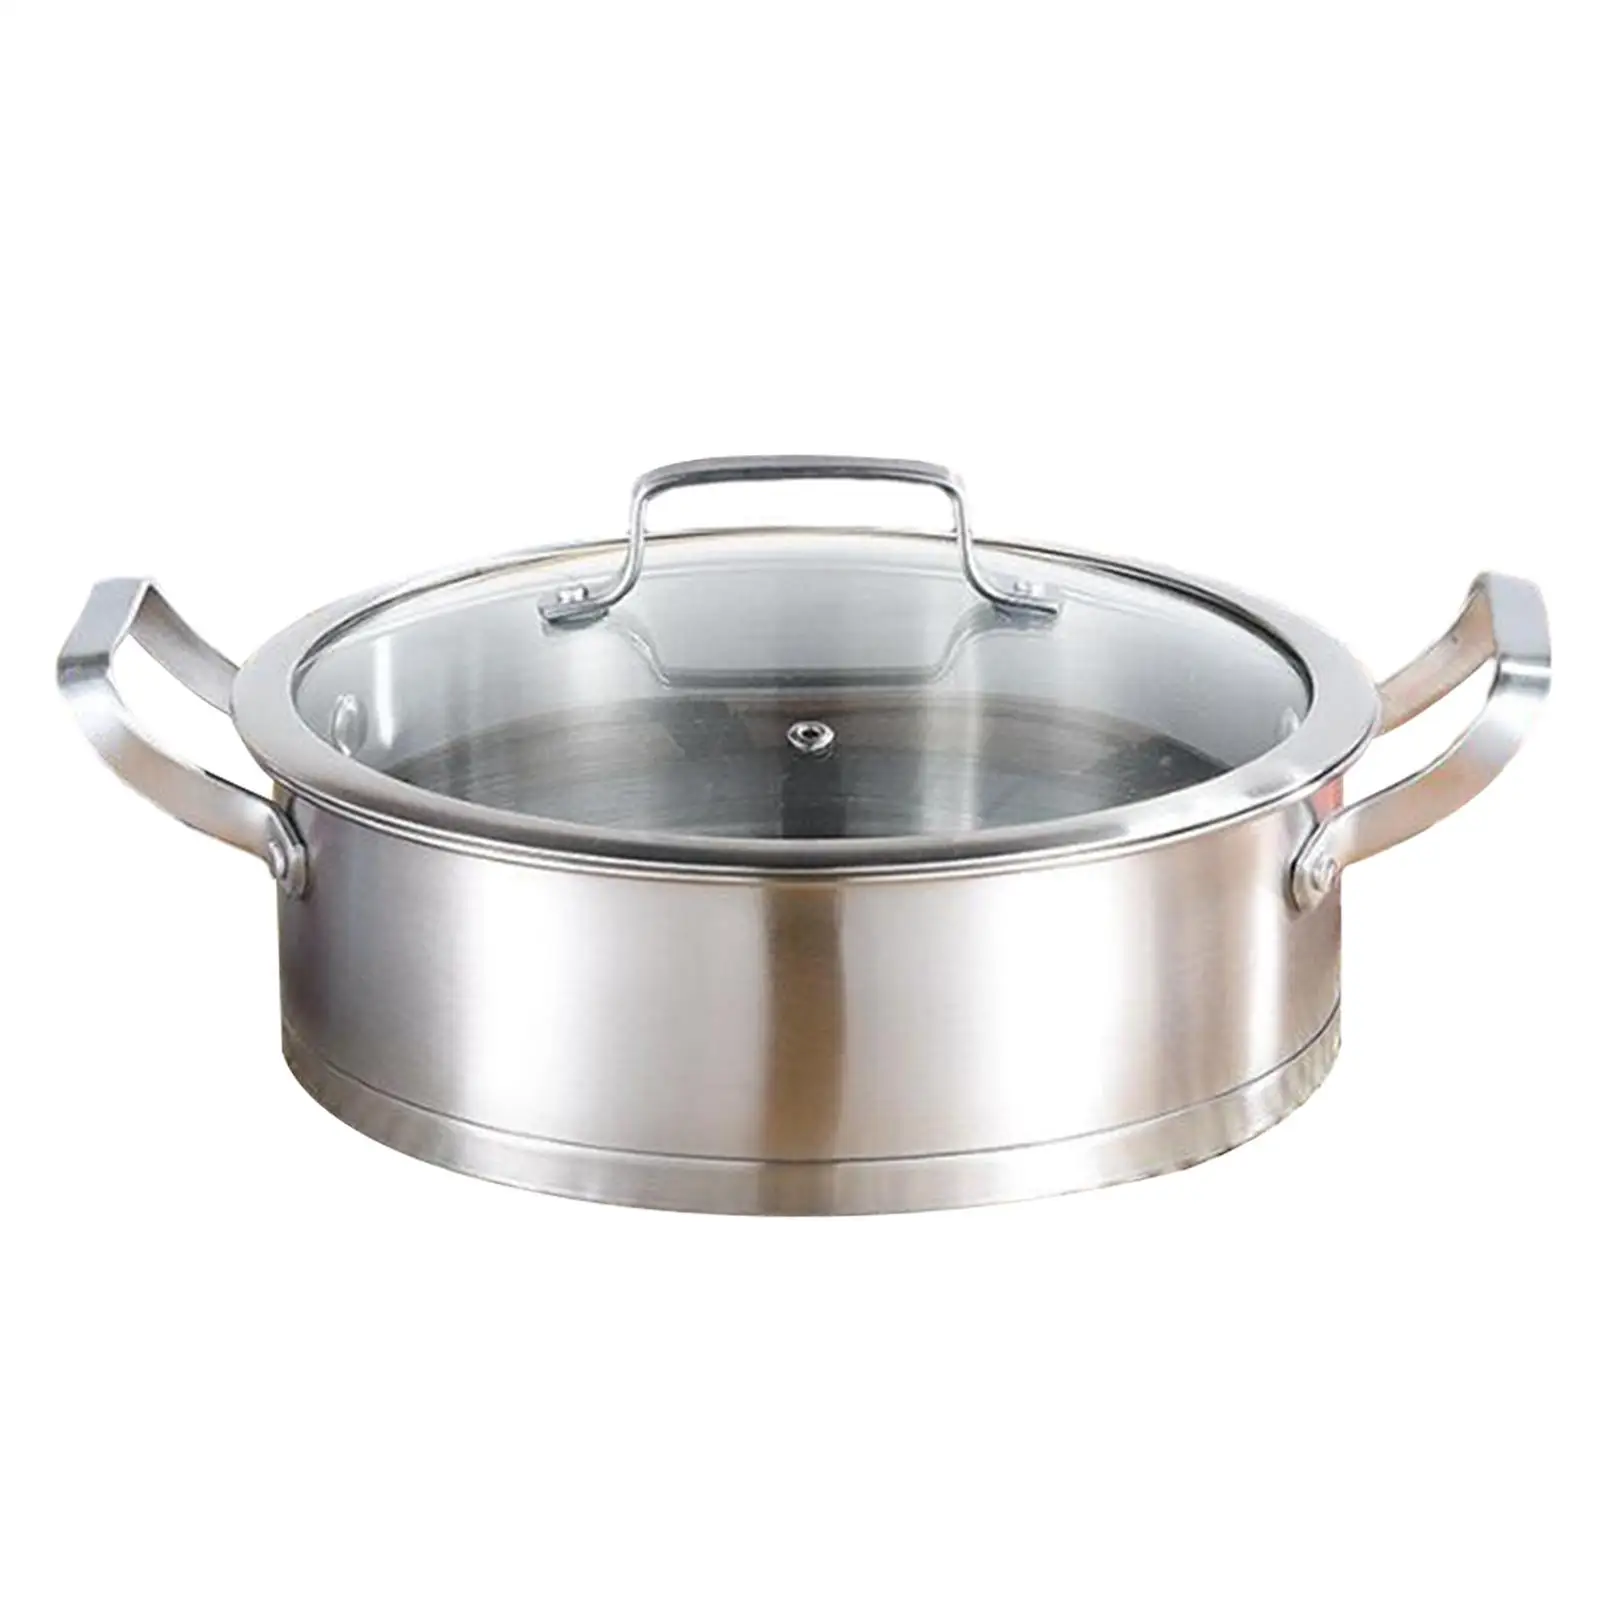 Kitchen Utensils Frying Pan Cooking Tools Multipurpose Kitchen Pot Stainless Steel Cooking Pot for Bar Kitchen Countertop Home